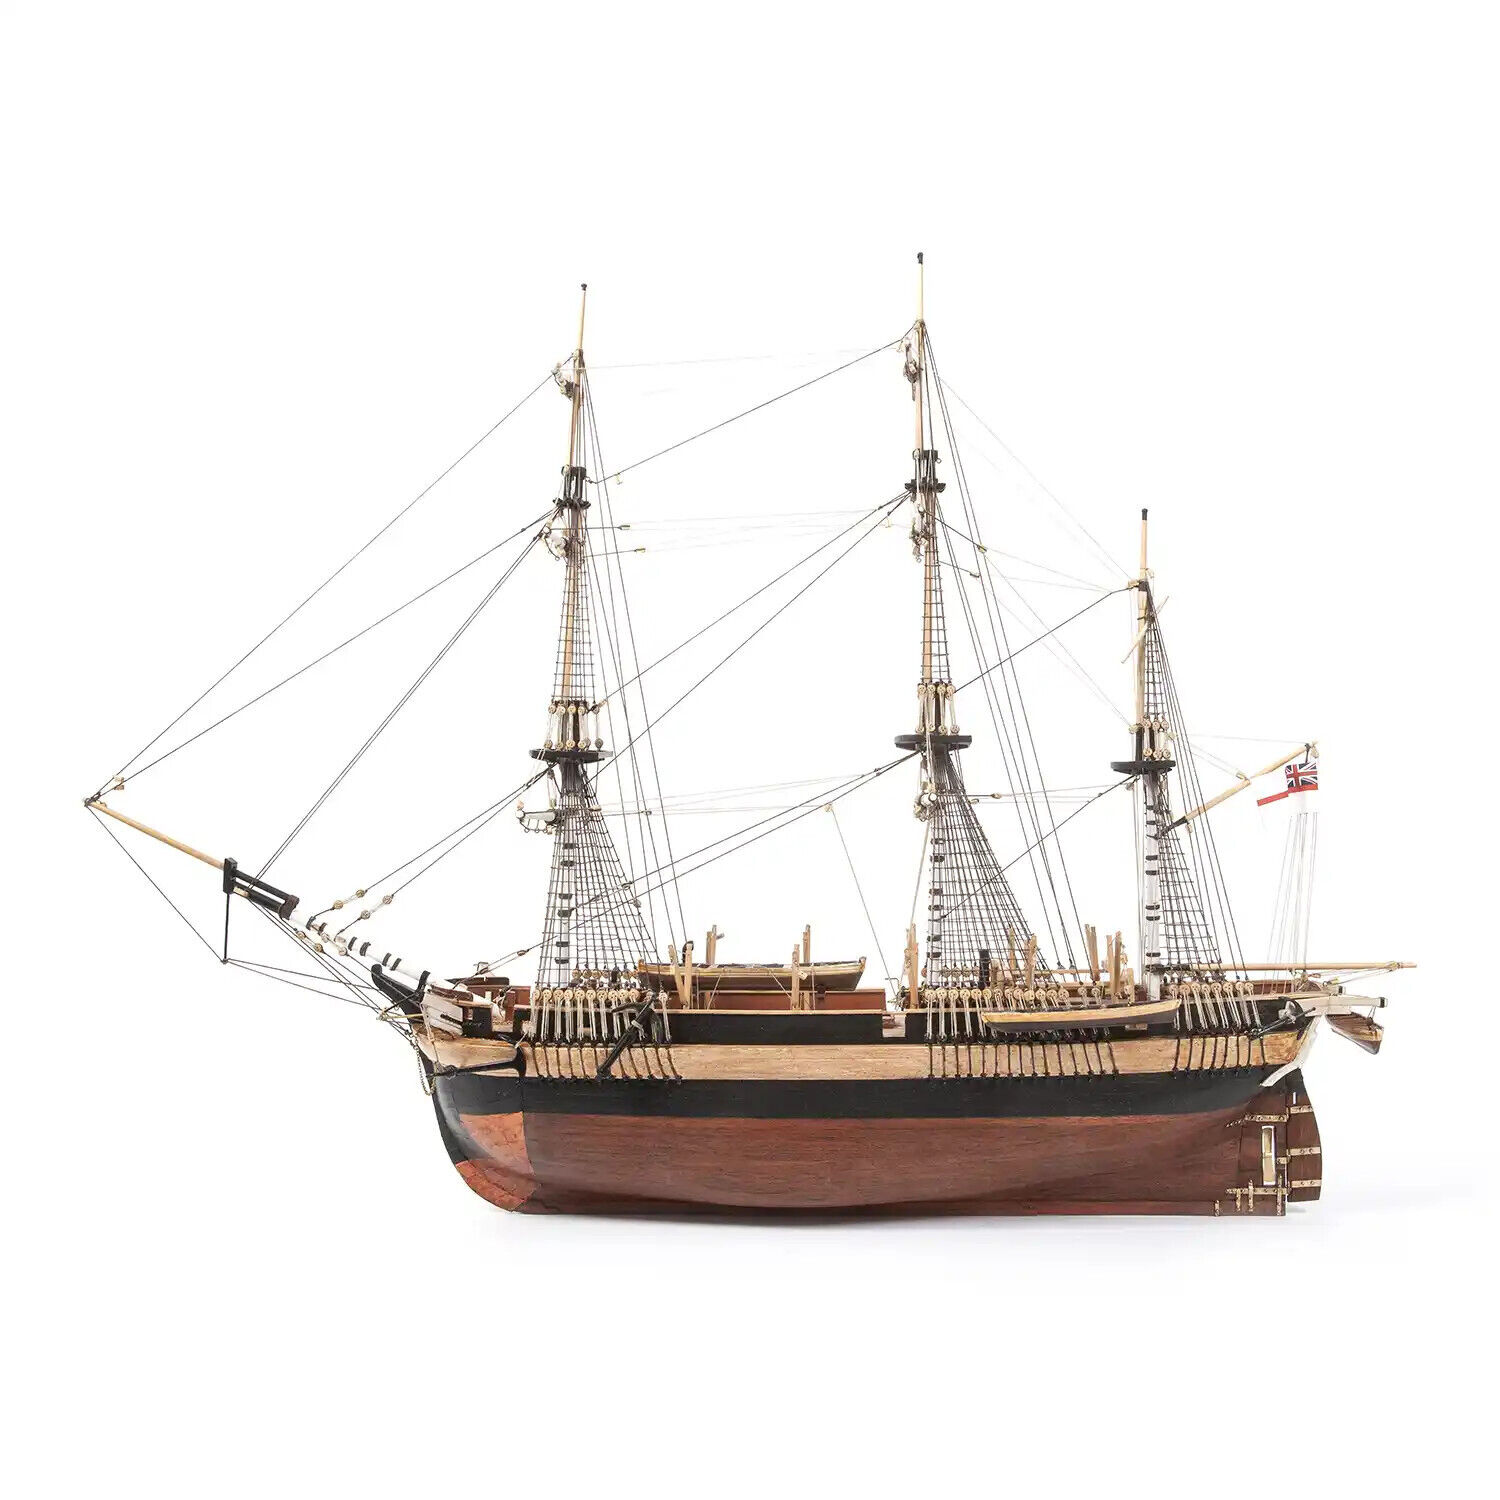 Occre Ref. 12009 - Hms Erebus - 1:75 - Kit Of Mount IN Wood And Metal